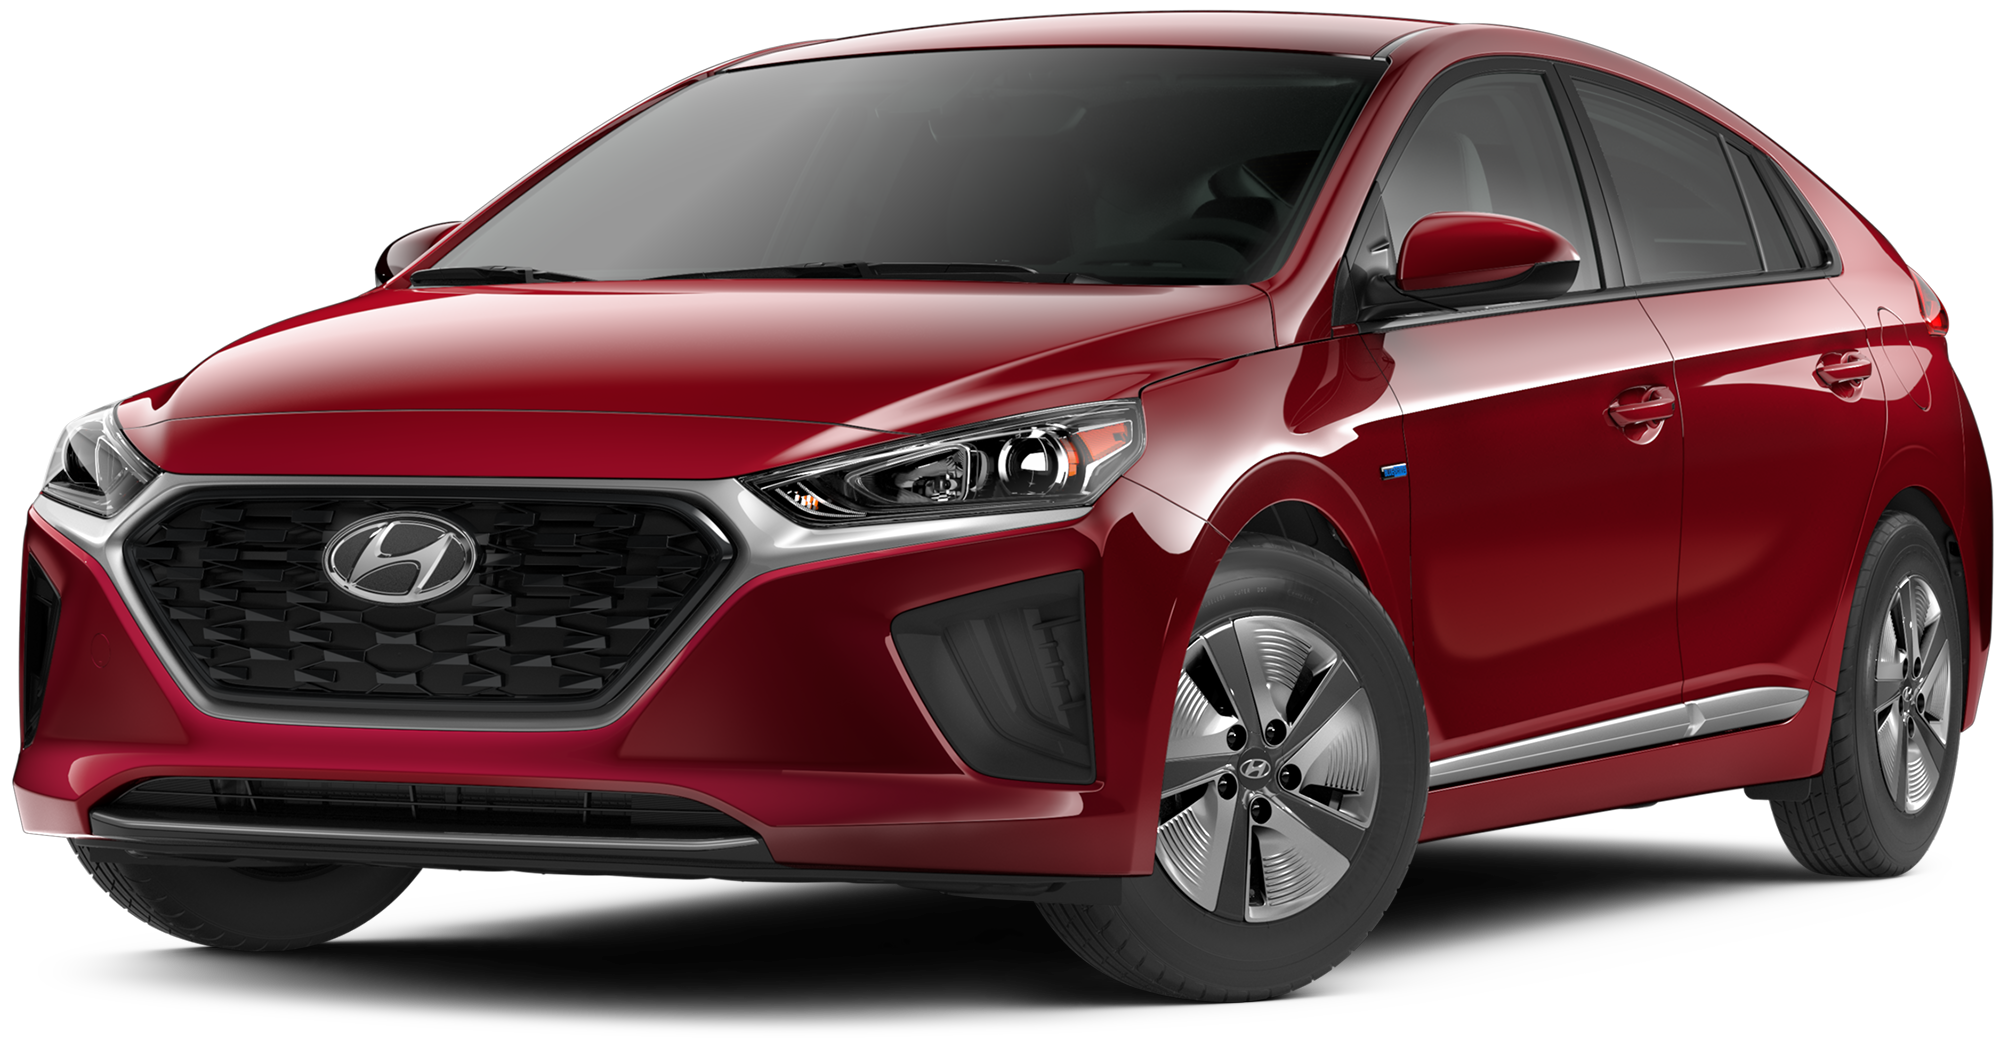 2020 Hyundai Ioniq Hybrid Incentives, Specials & Offers in Amherst NS